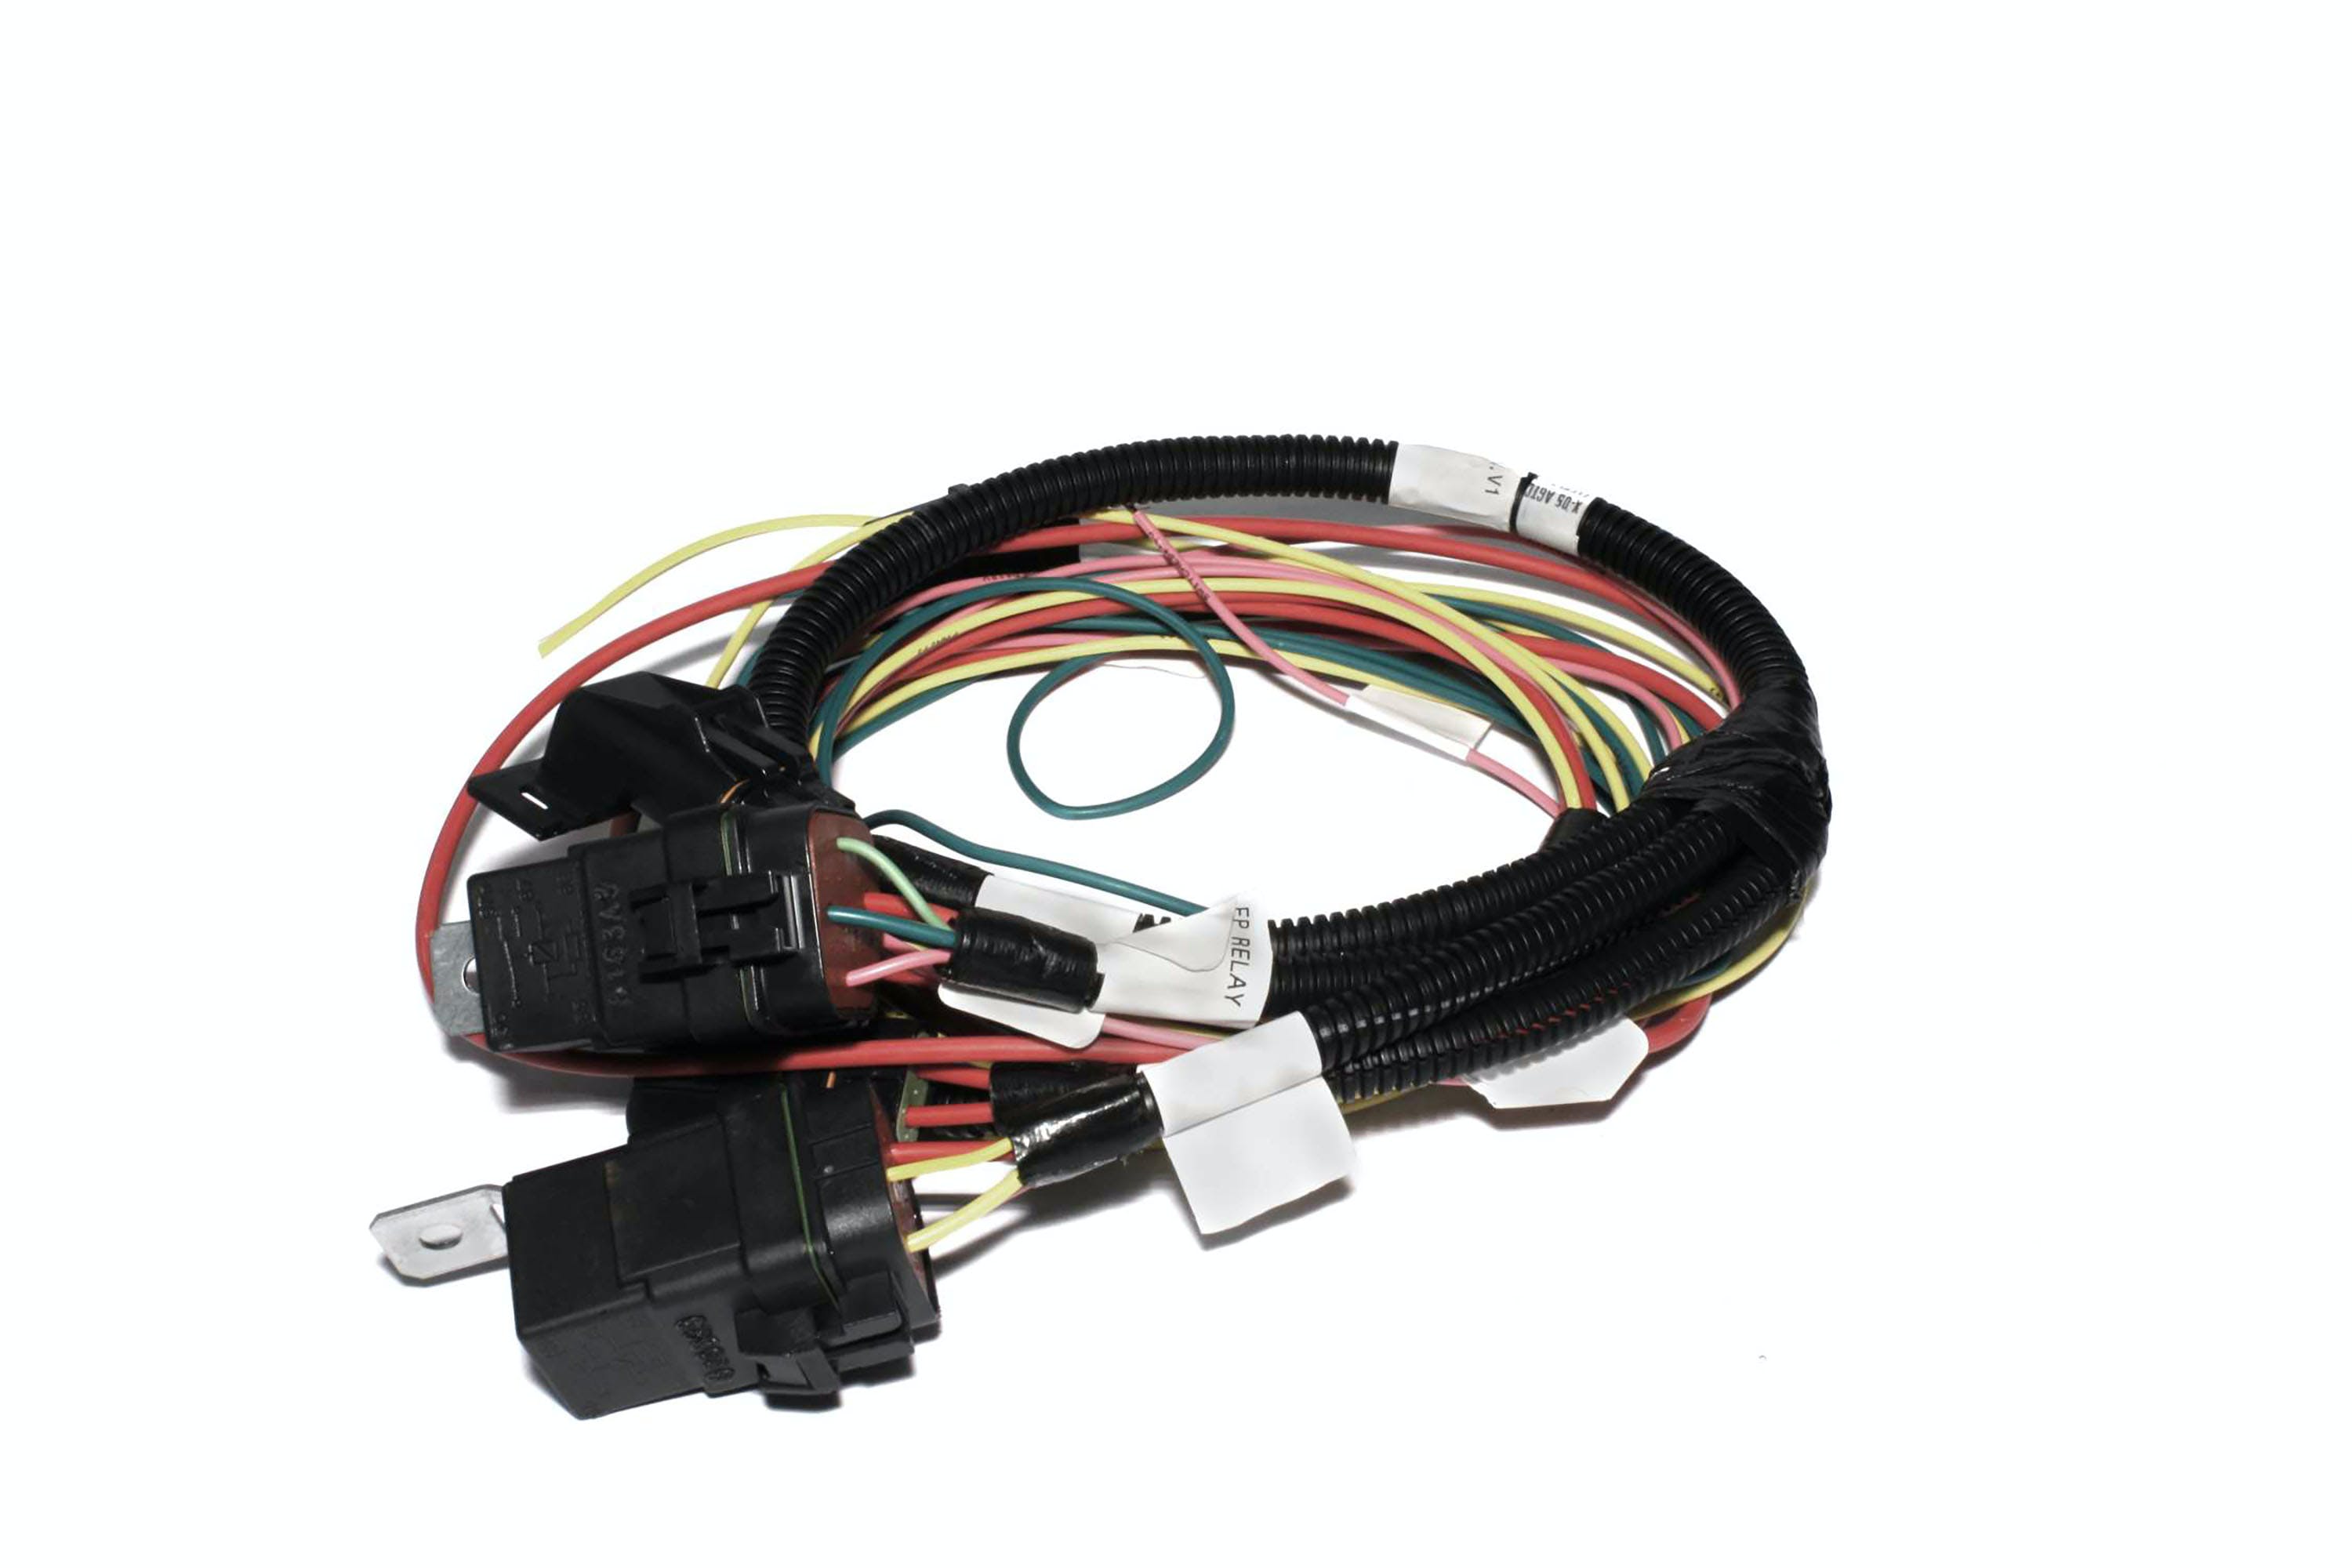 FAST - Fuel Air Spark Technology 301406 Harness, Fast Fan And Fuel Pum P Kit